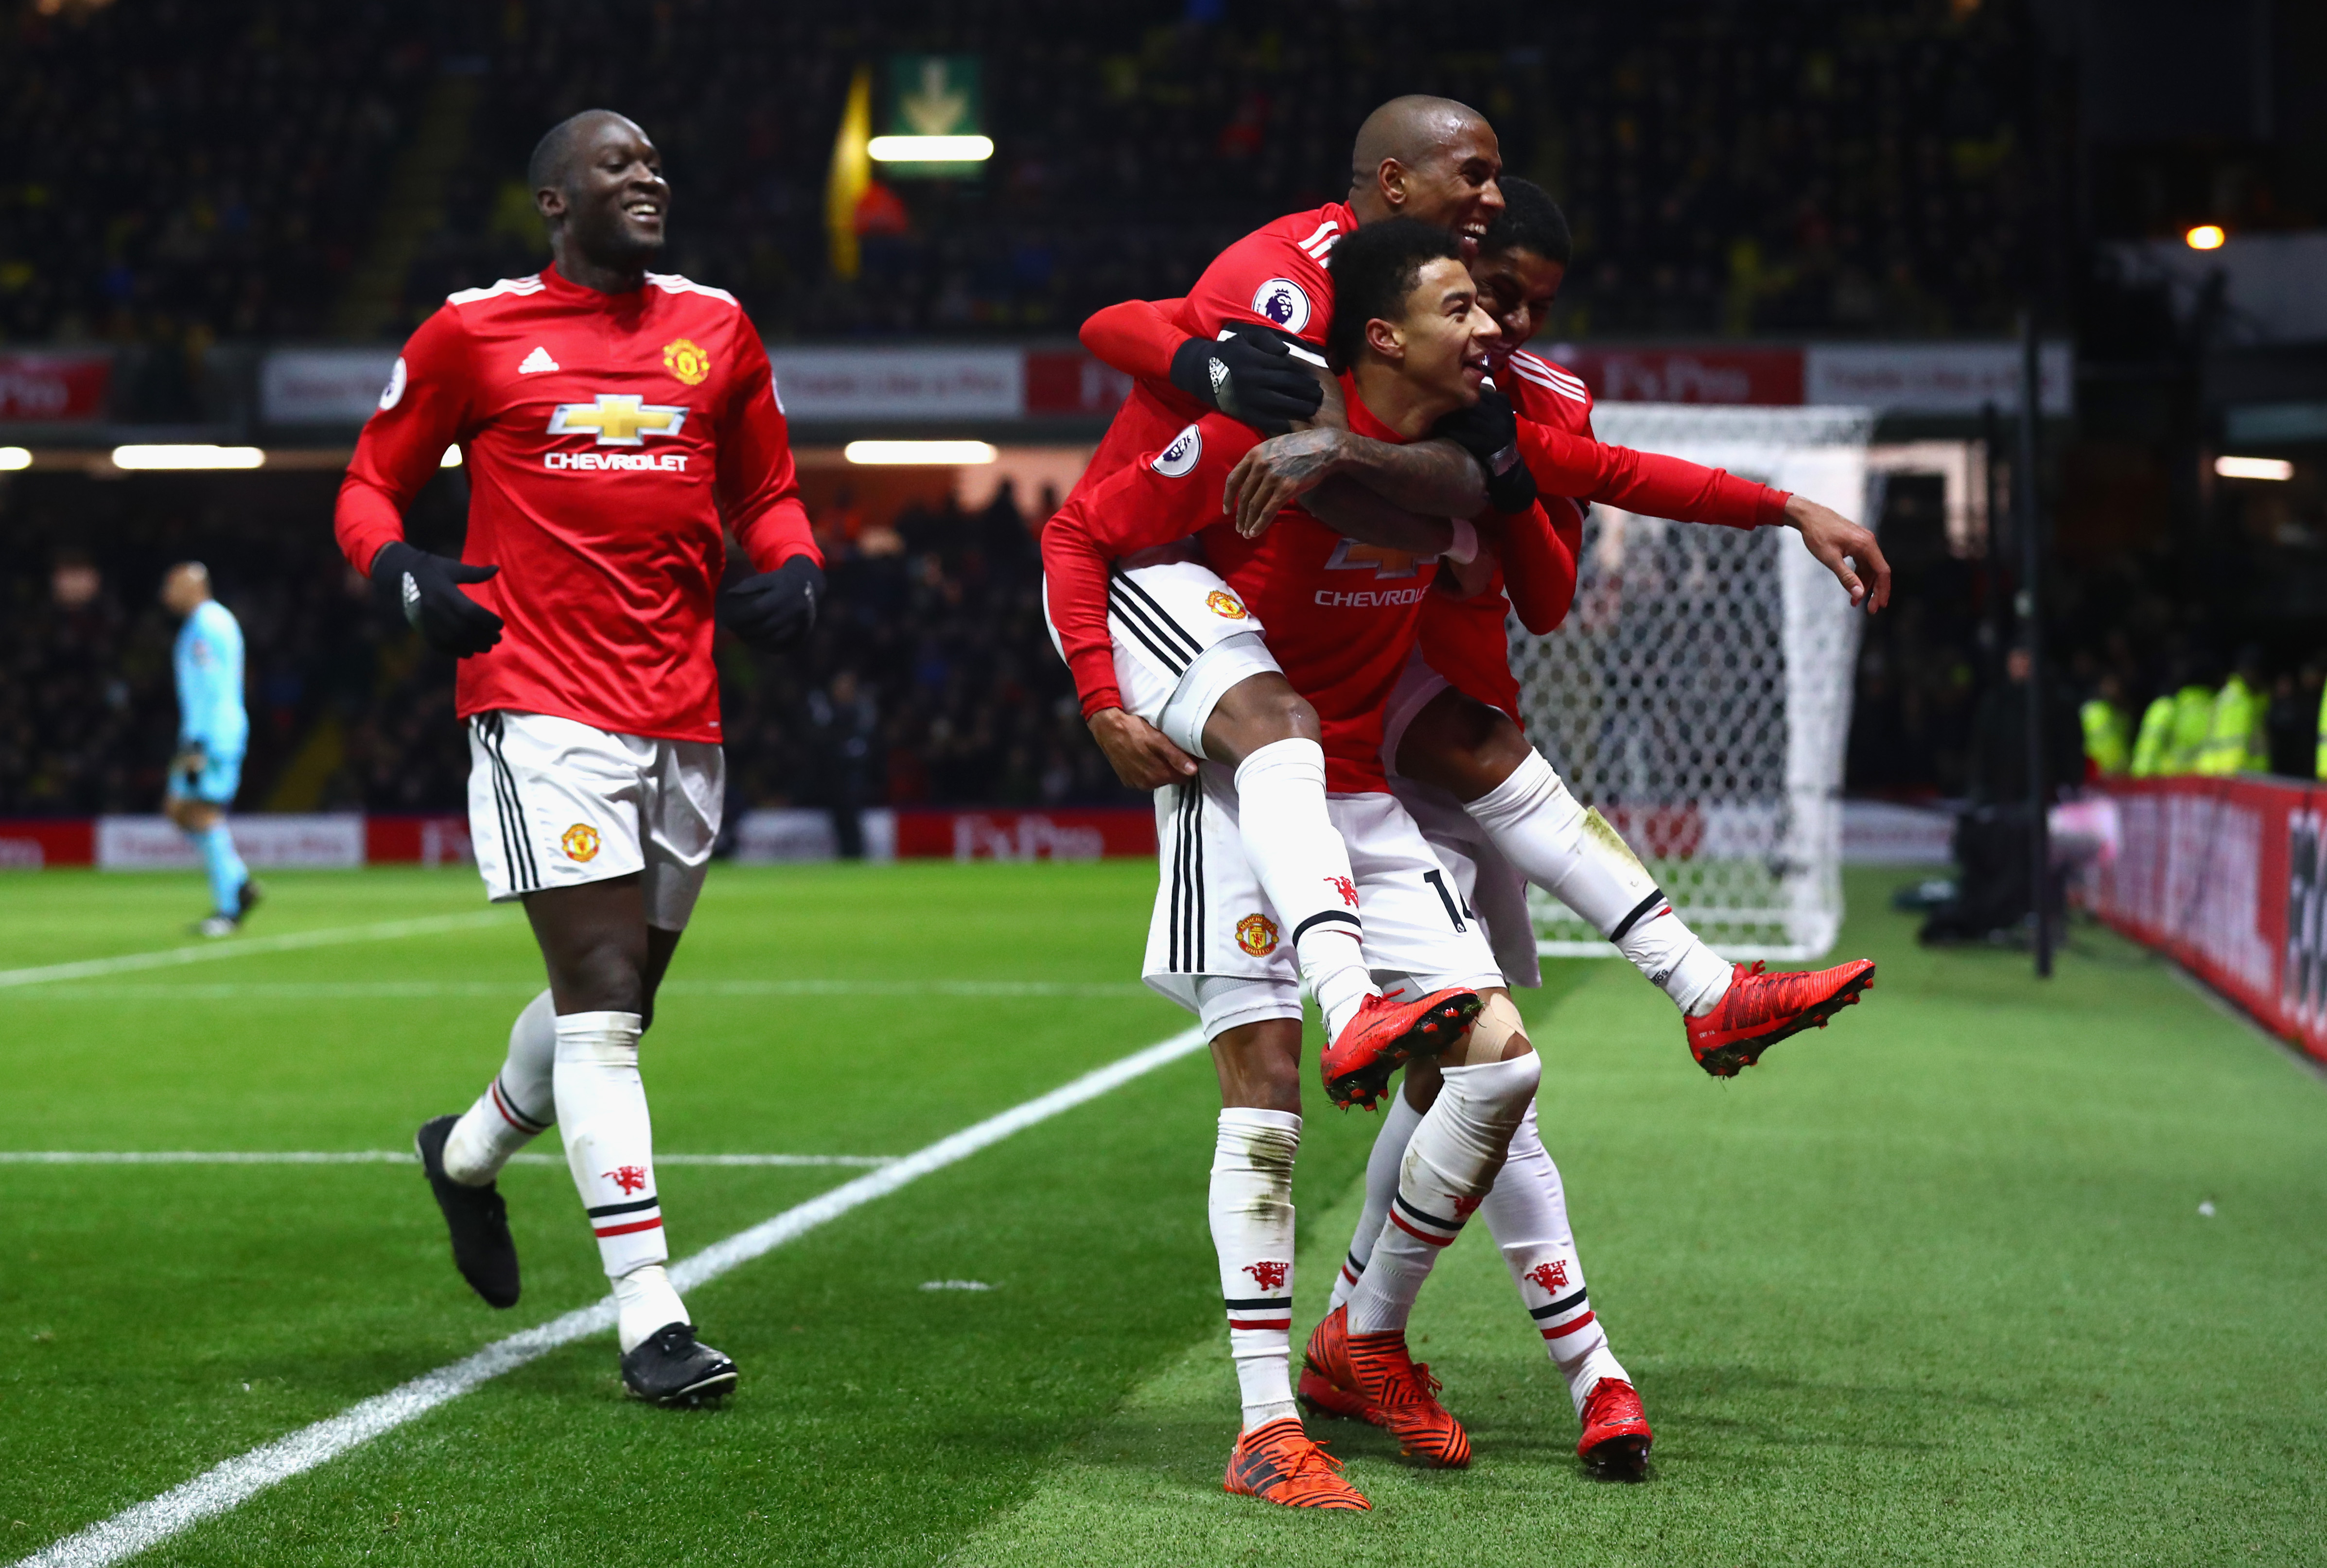 WATFORD, ENGLAND - NOVEMBER 28:  Jesse Lingard of Manchester United celebrates as he scores their fourth goal with Ashley Young and Romelu Lukaku during the Premier League match between Watford and Manchester United at Vicarage Road on November 28, 2017 in Watford, England.  (Photo by Clive Rose/Getty Images)